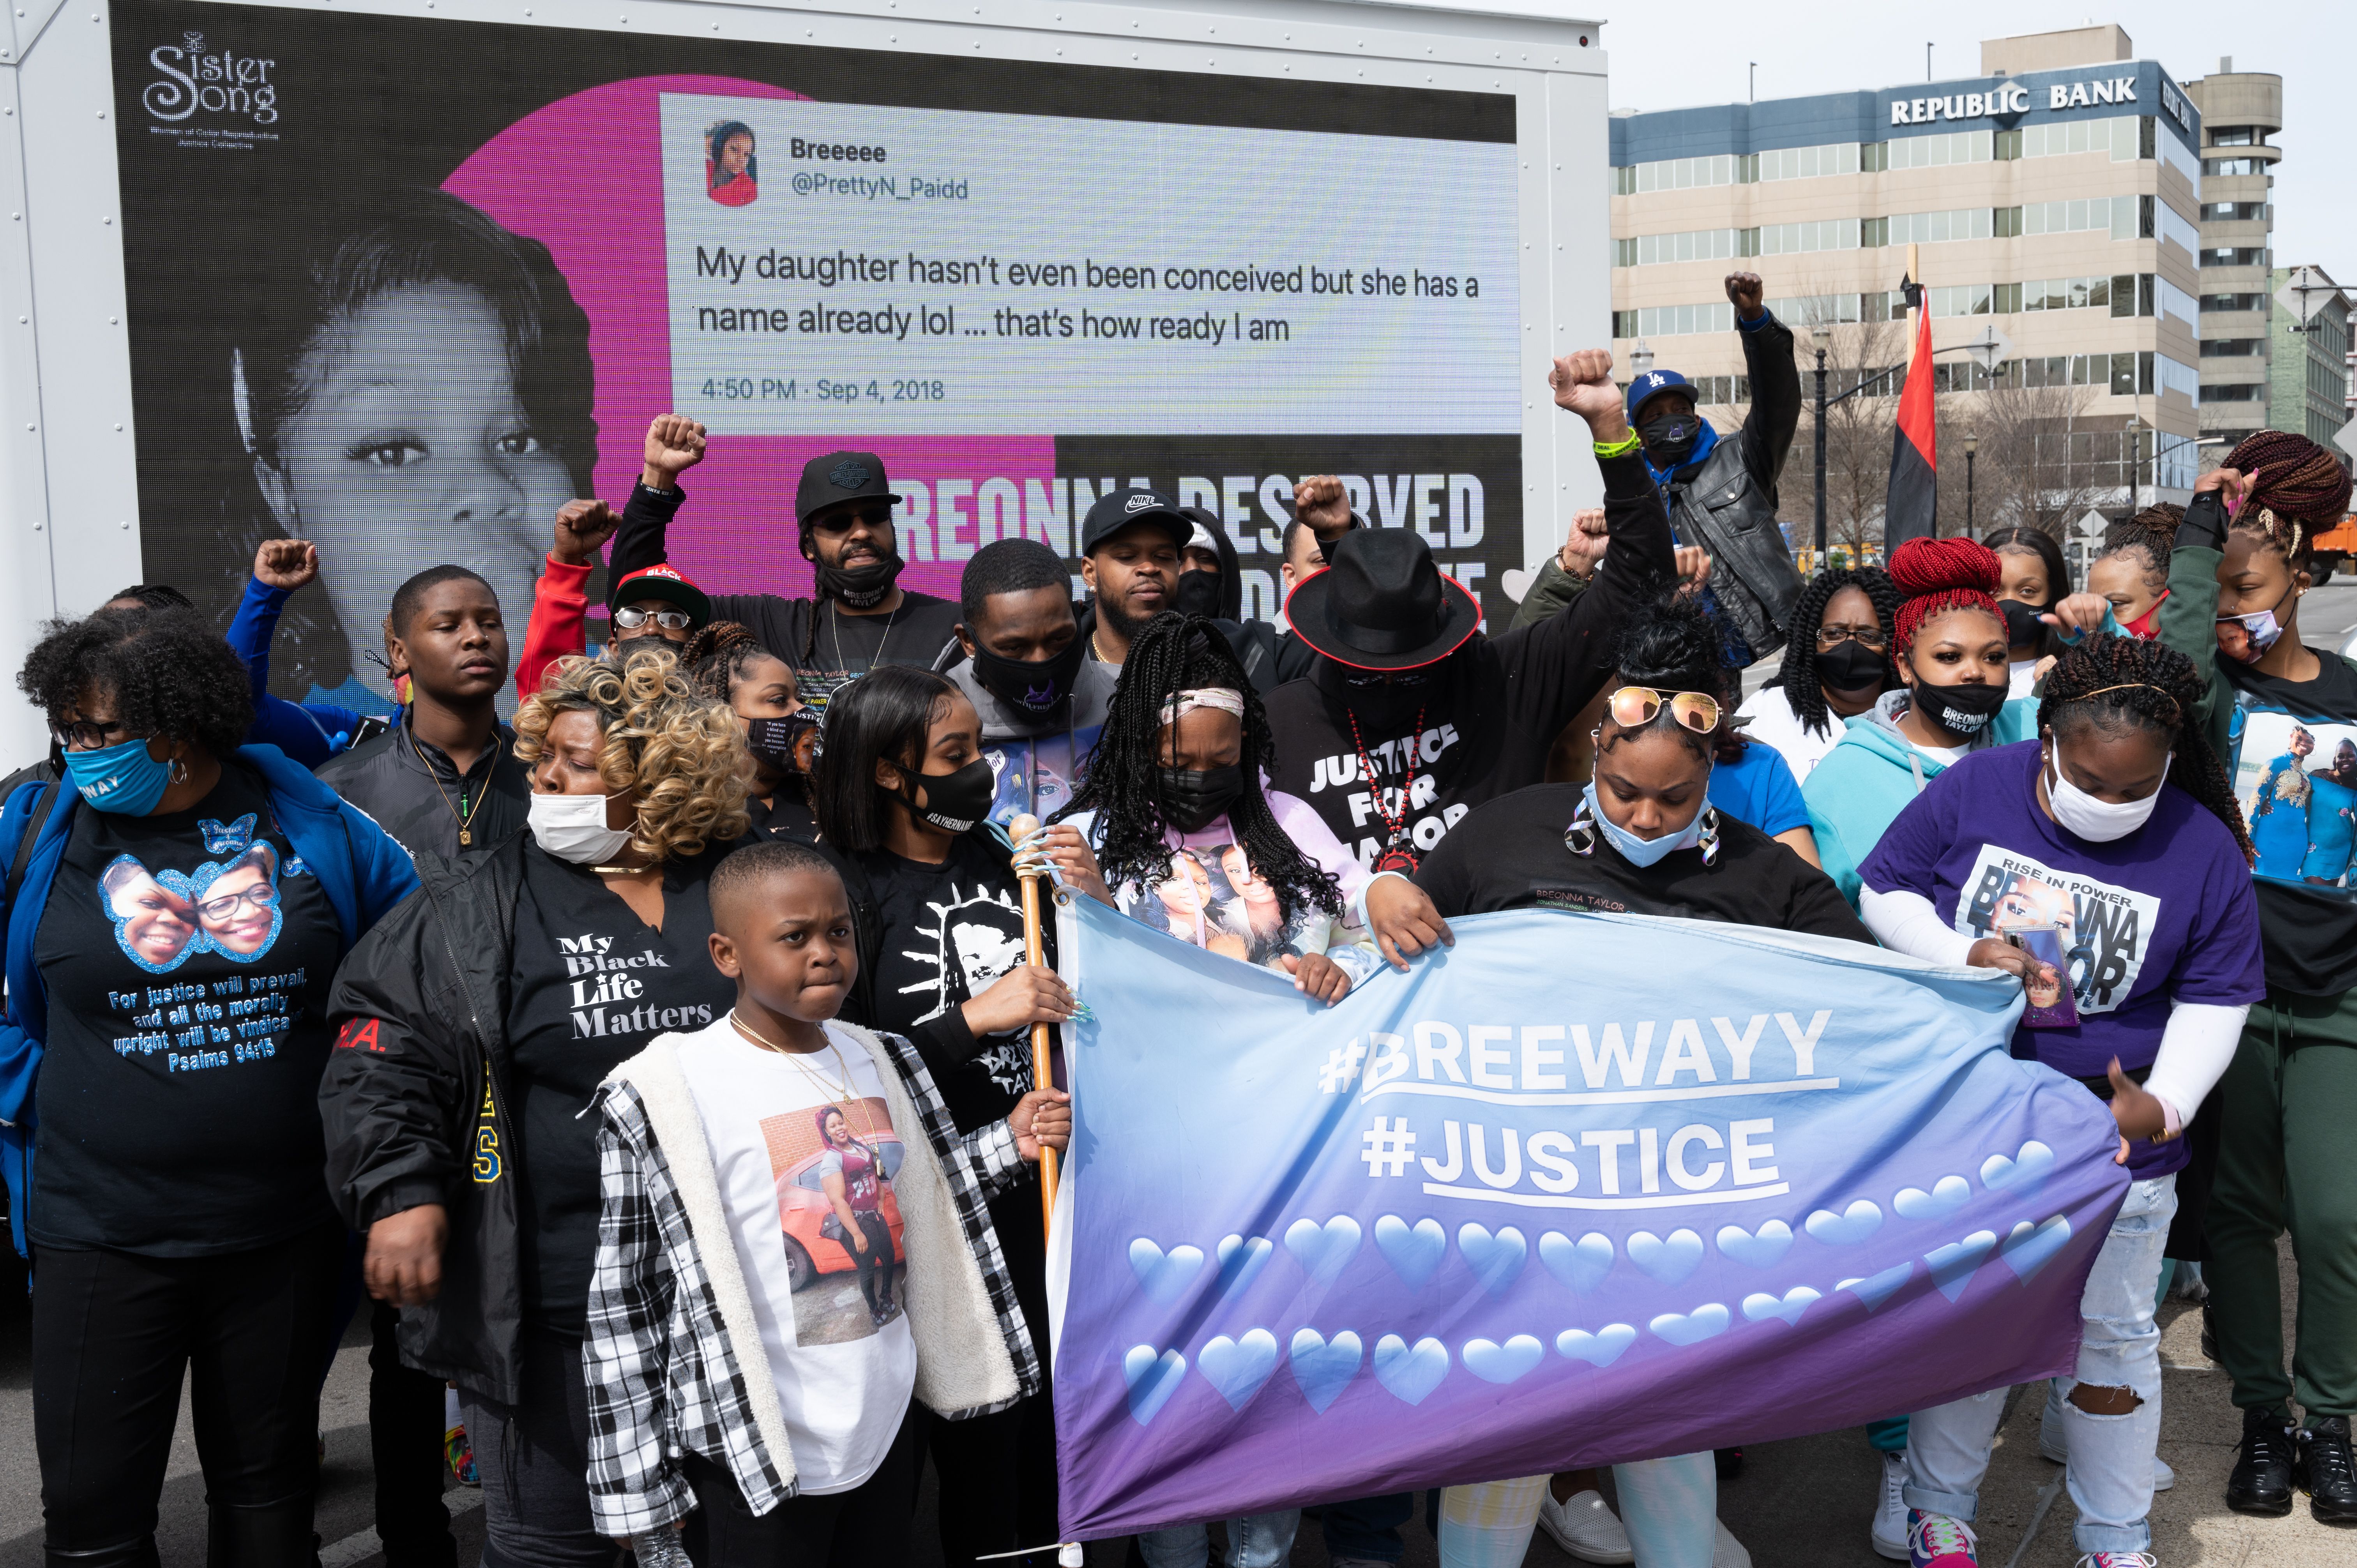  Tamika Palmer (C), mother of Breonna Taylor and others stand with their fists up before a mobile billboard near Jefferson Square Park on March 13, 2021 in Louisville, Kentucky. 